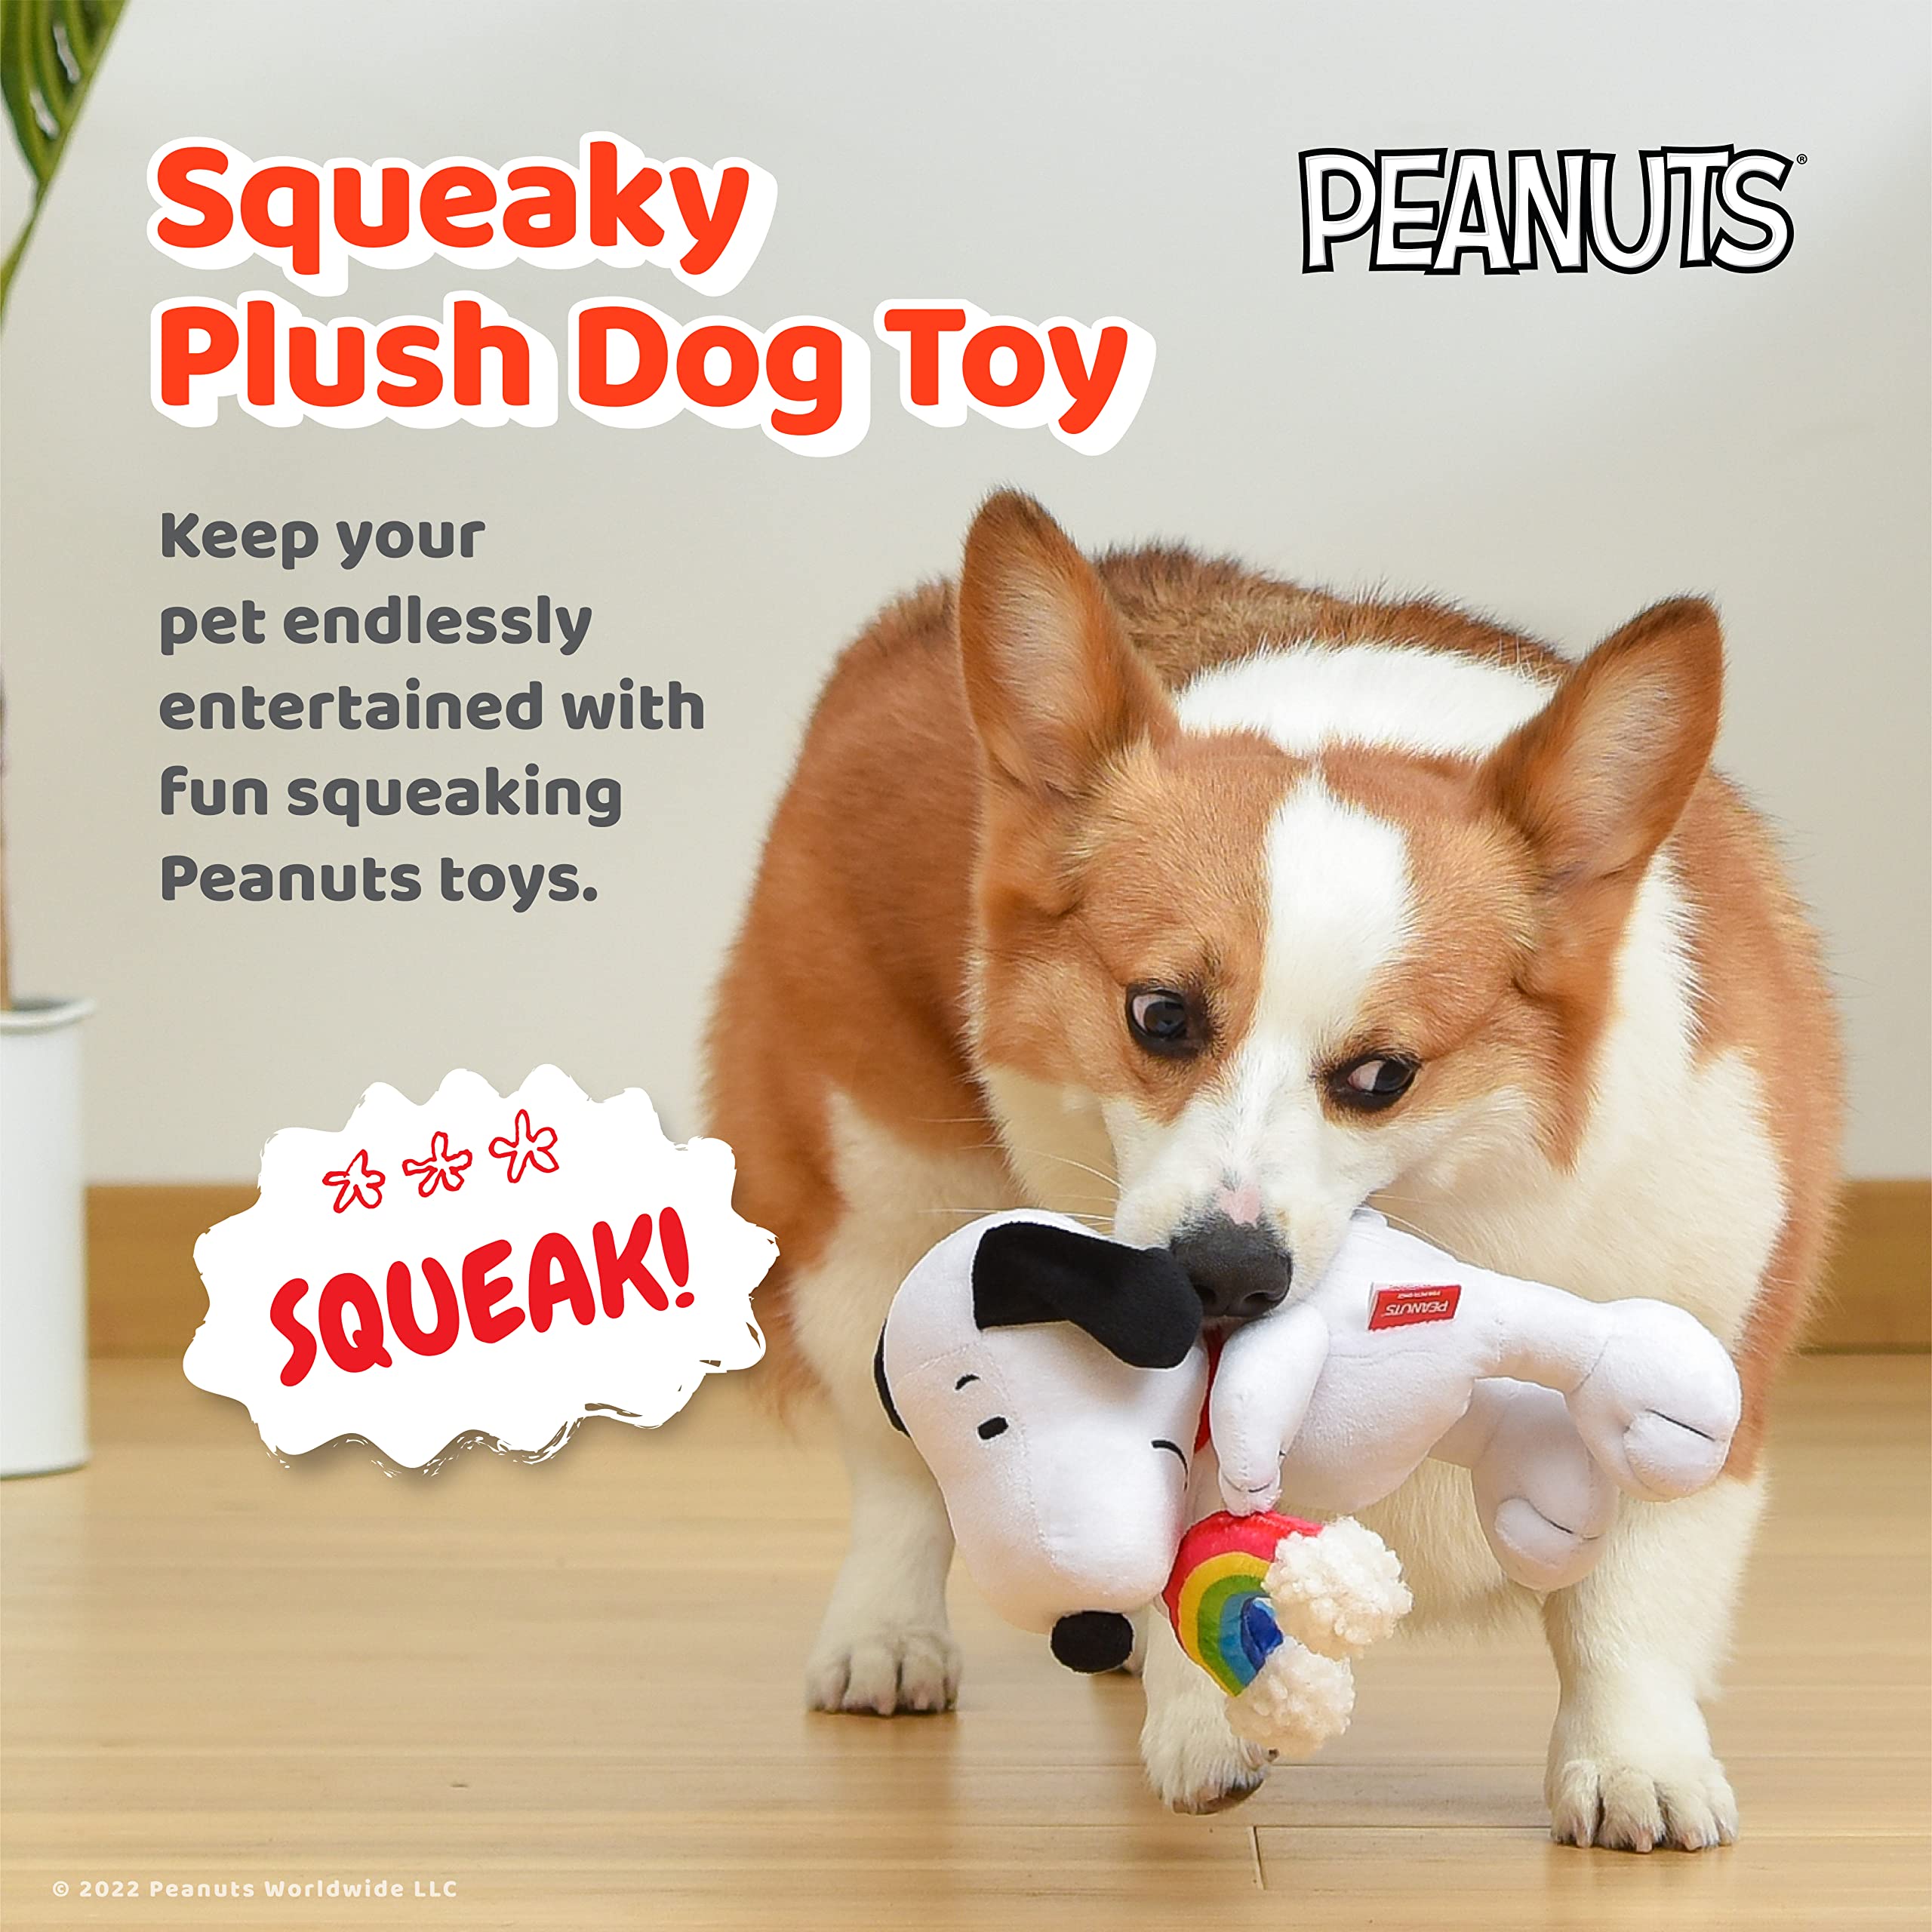 Peanuts for Pets Peanuts: Love 6” Snoopy Rainbow Squeaker Pet Toy 6" Snoopy Love Squeaky Pet Toy | Peanuts Dog Toys, Snoopy | Love Gifts for Pets, Snoopy Rainbow Toys for Dogs